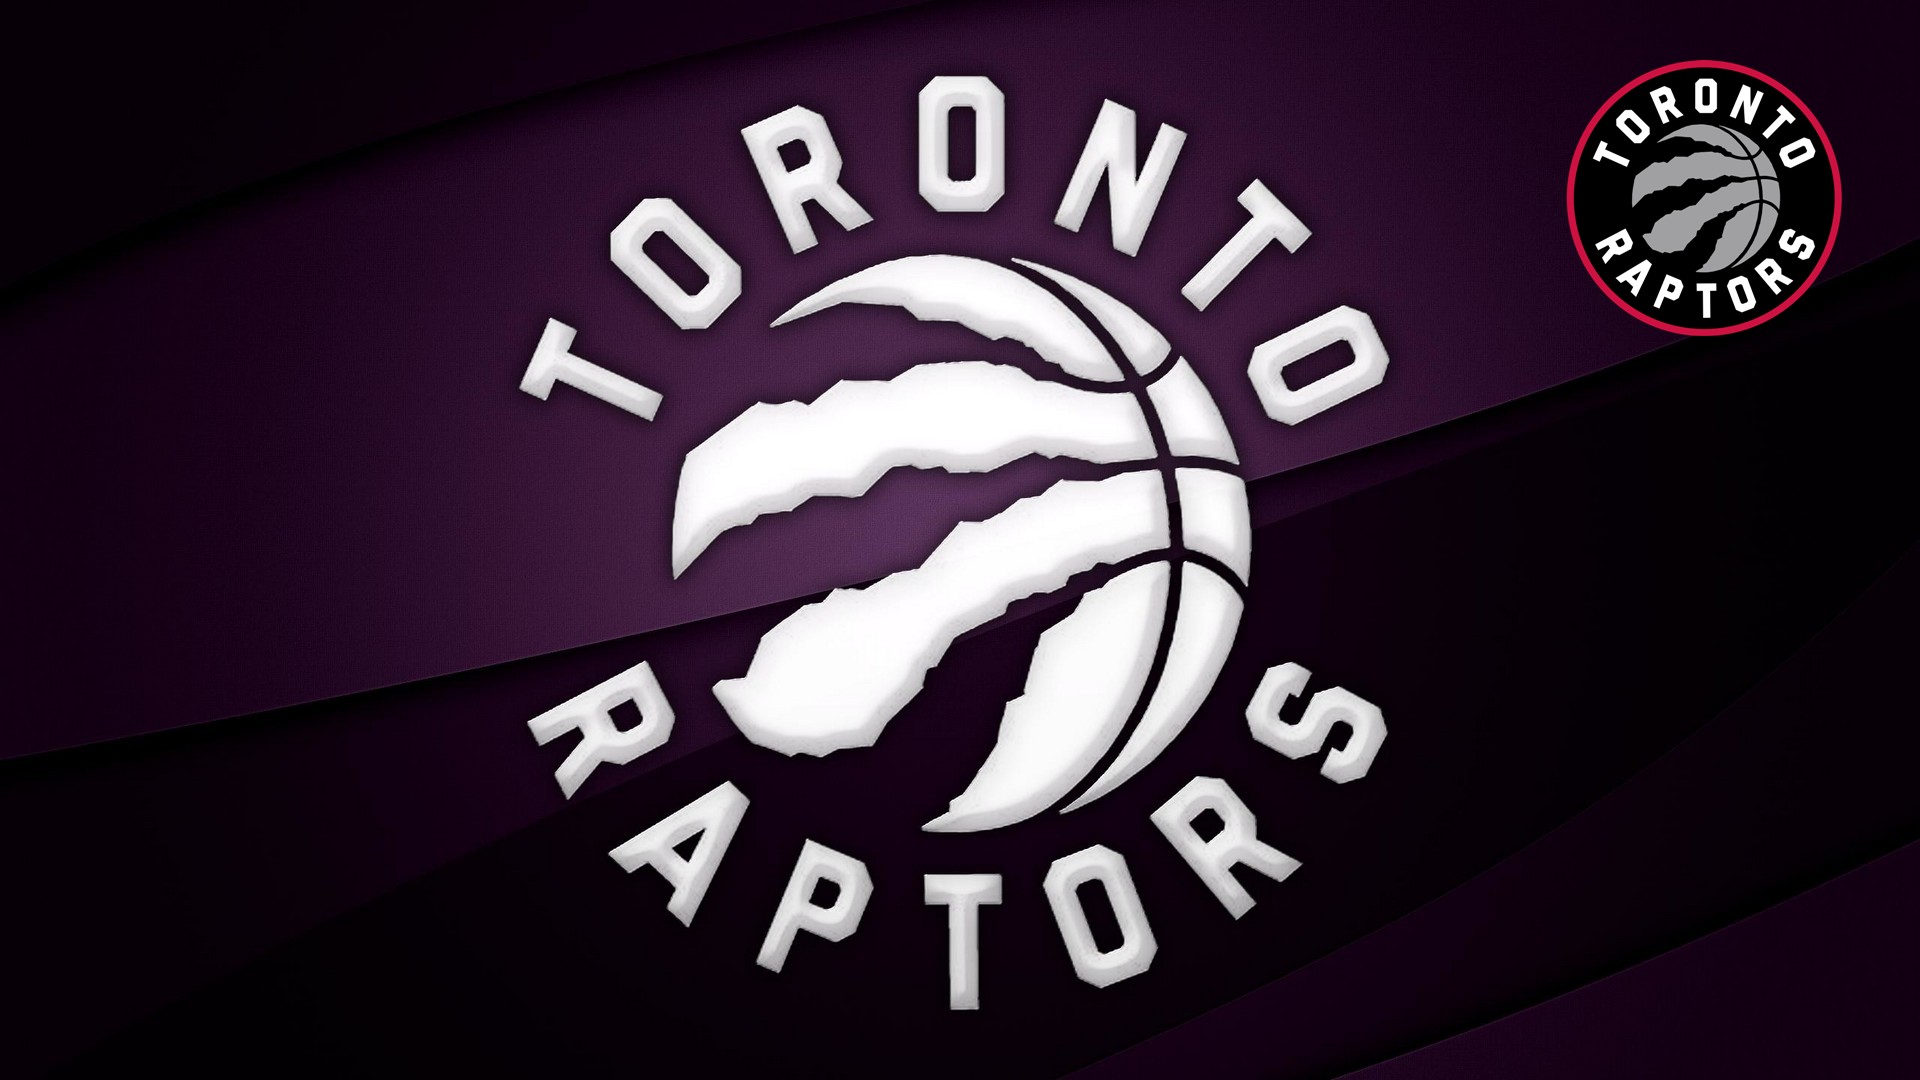 Backgrounds Toronto Raptors HD with image dimensions 1920x1080 pixel. You can make this wallpaper for your Desktop Computer Backgrounds, Windows or Mac Screensavers, iPhone Lock screen, Tablet or Android and another Mobile Phone device